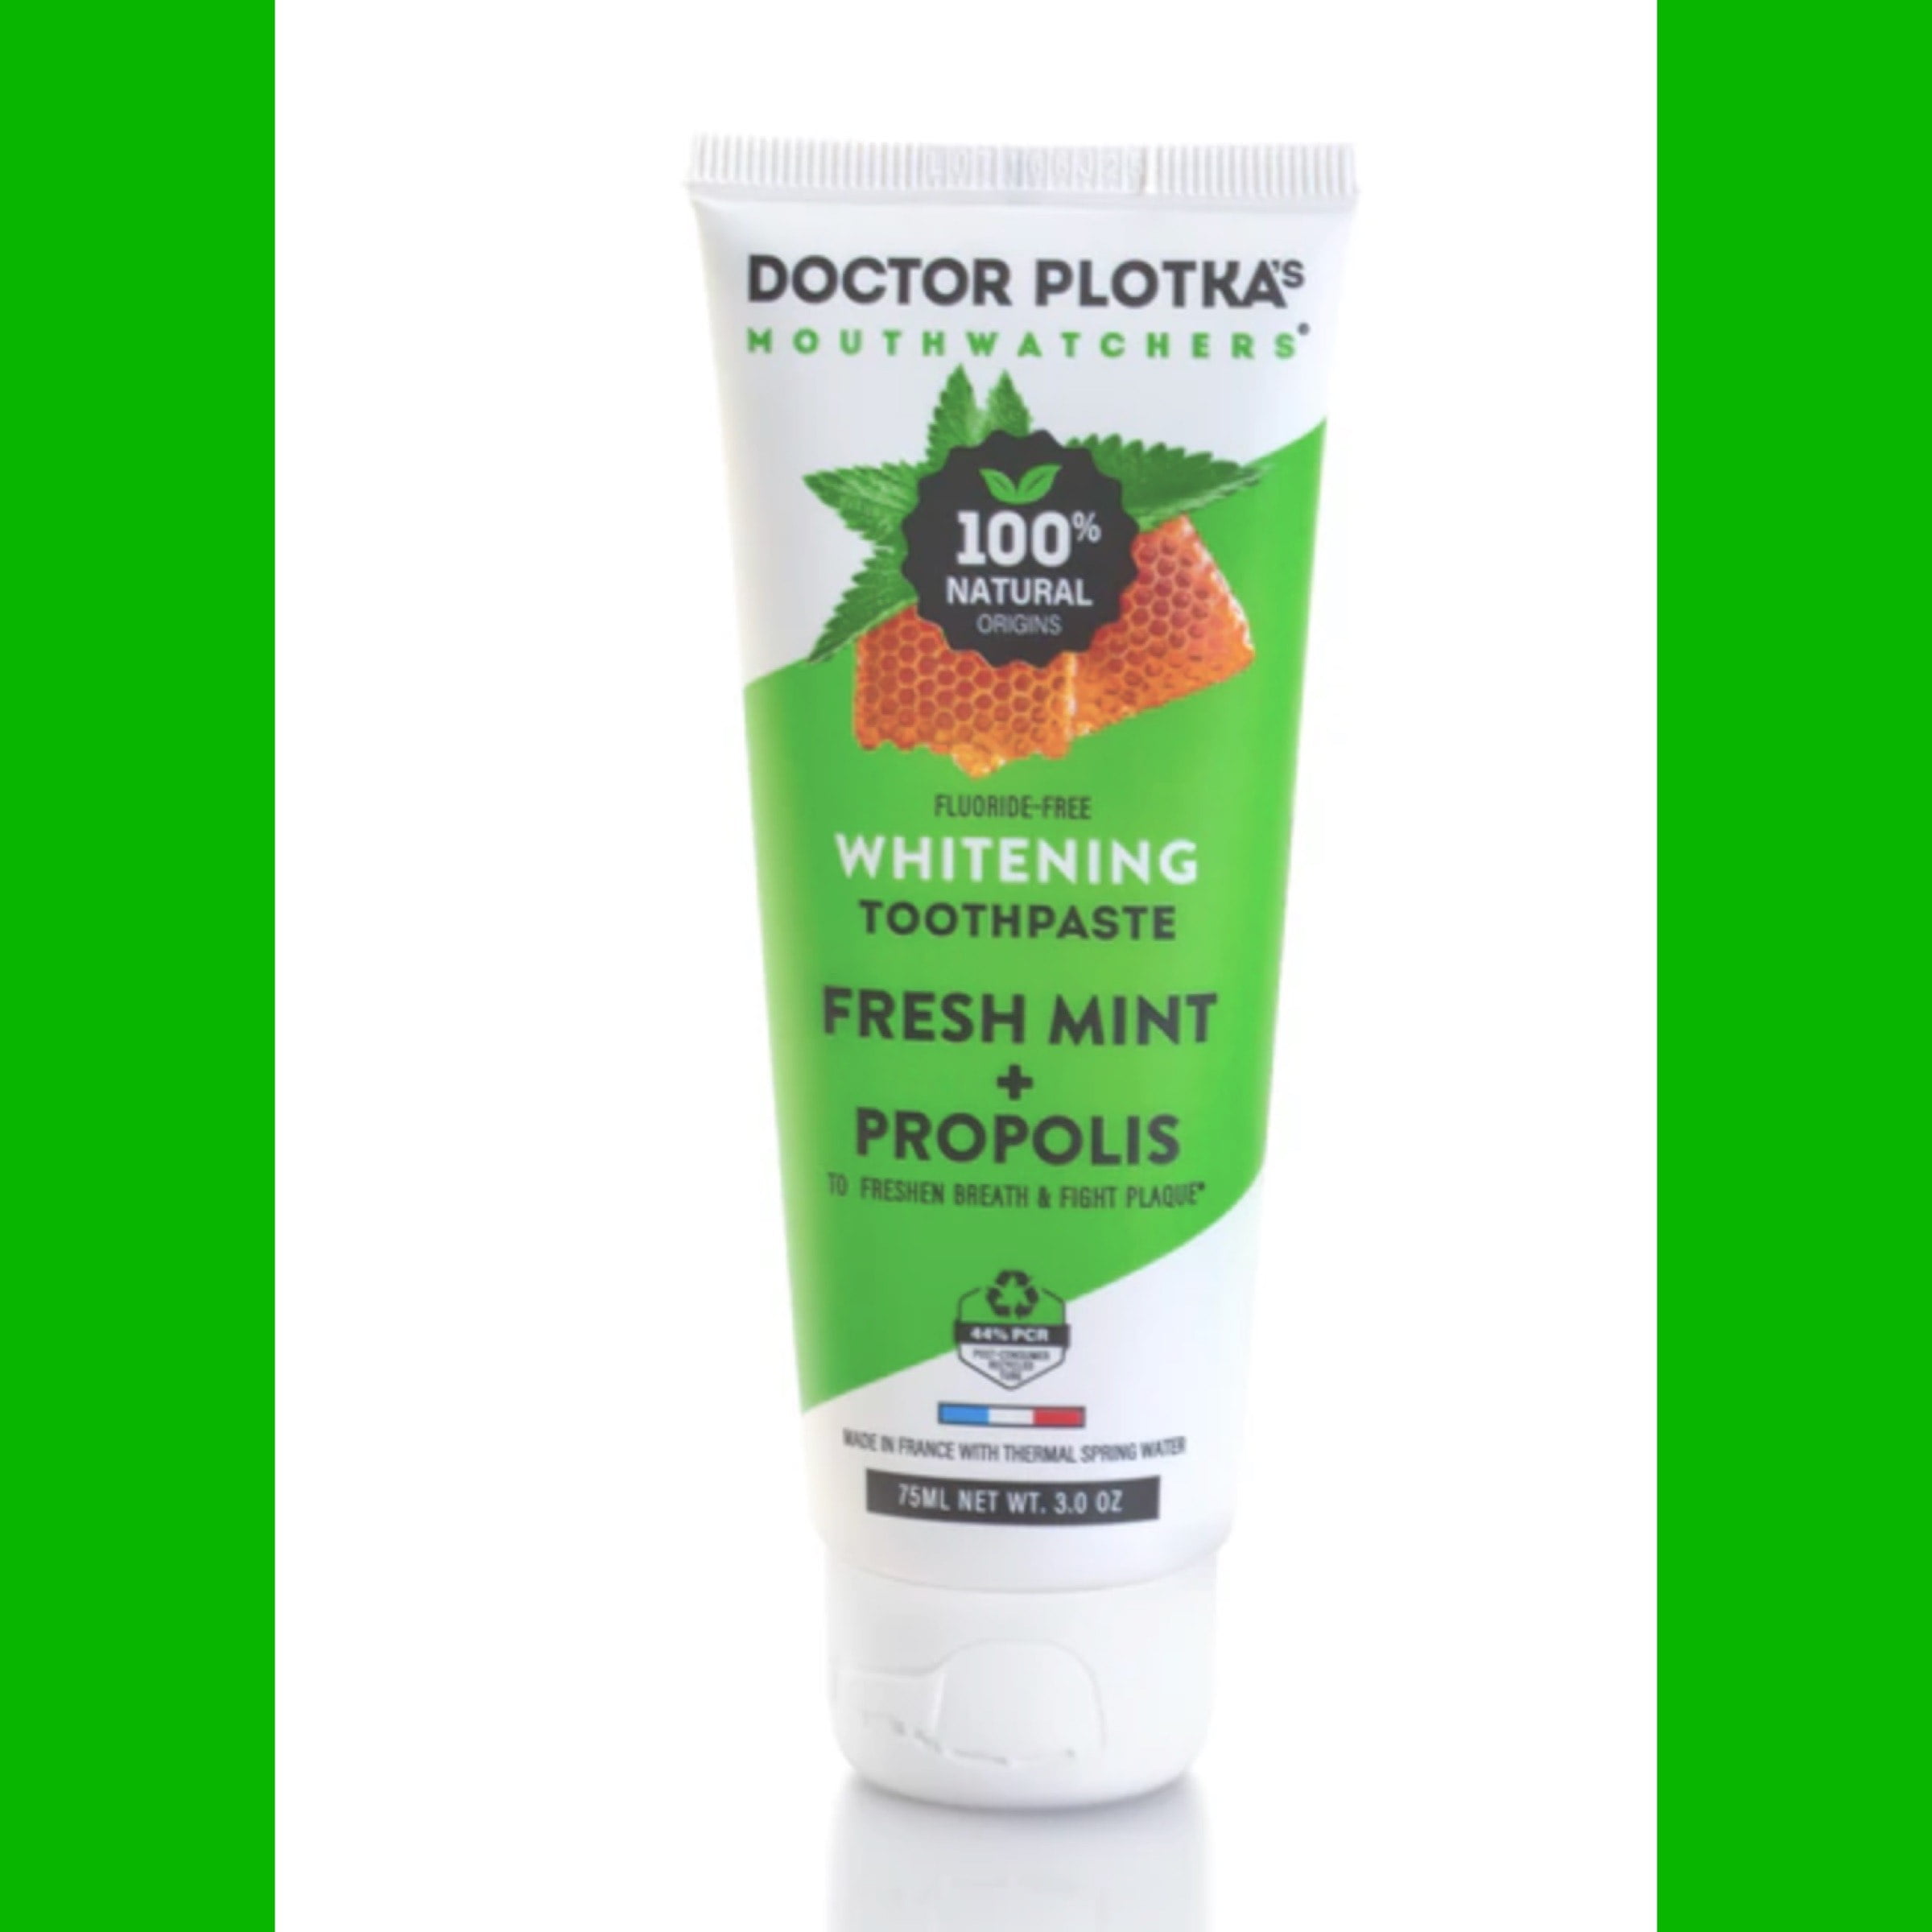 Doctor Plotka's All Natural Whitening Toothpaste product image via Michelle Frazee Everything Branding PR